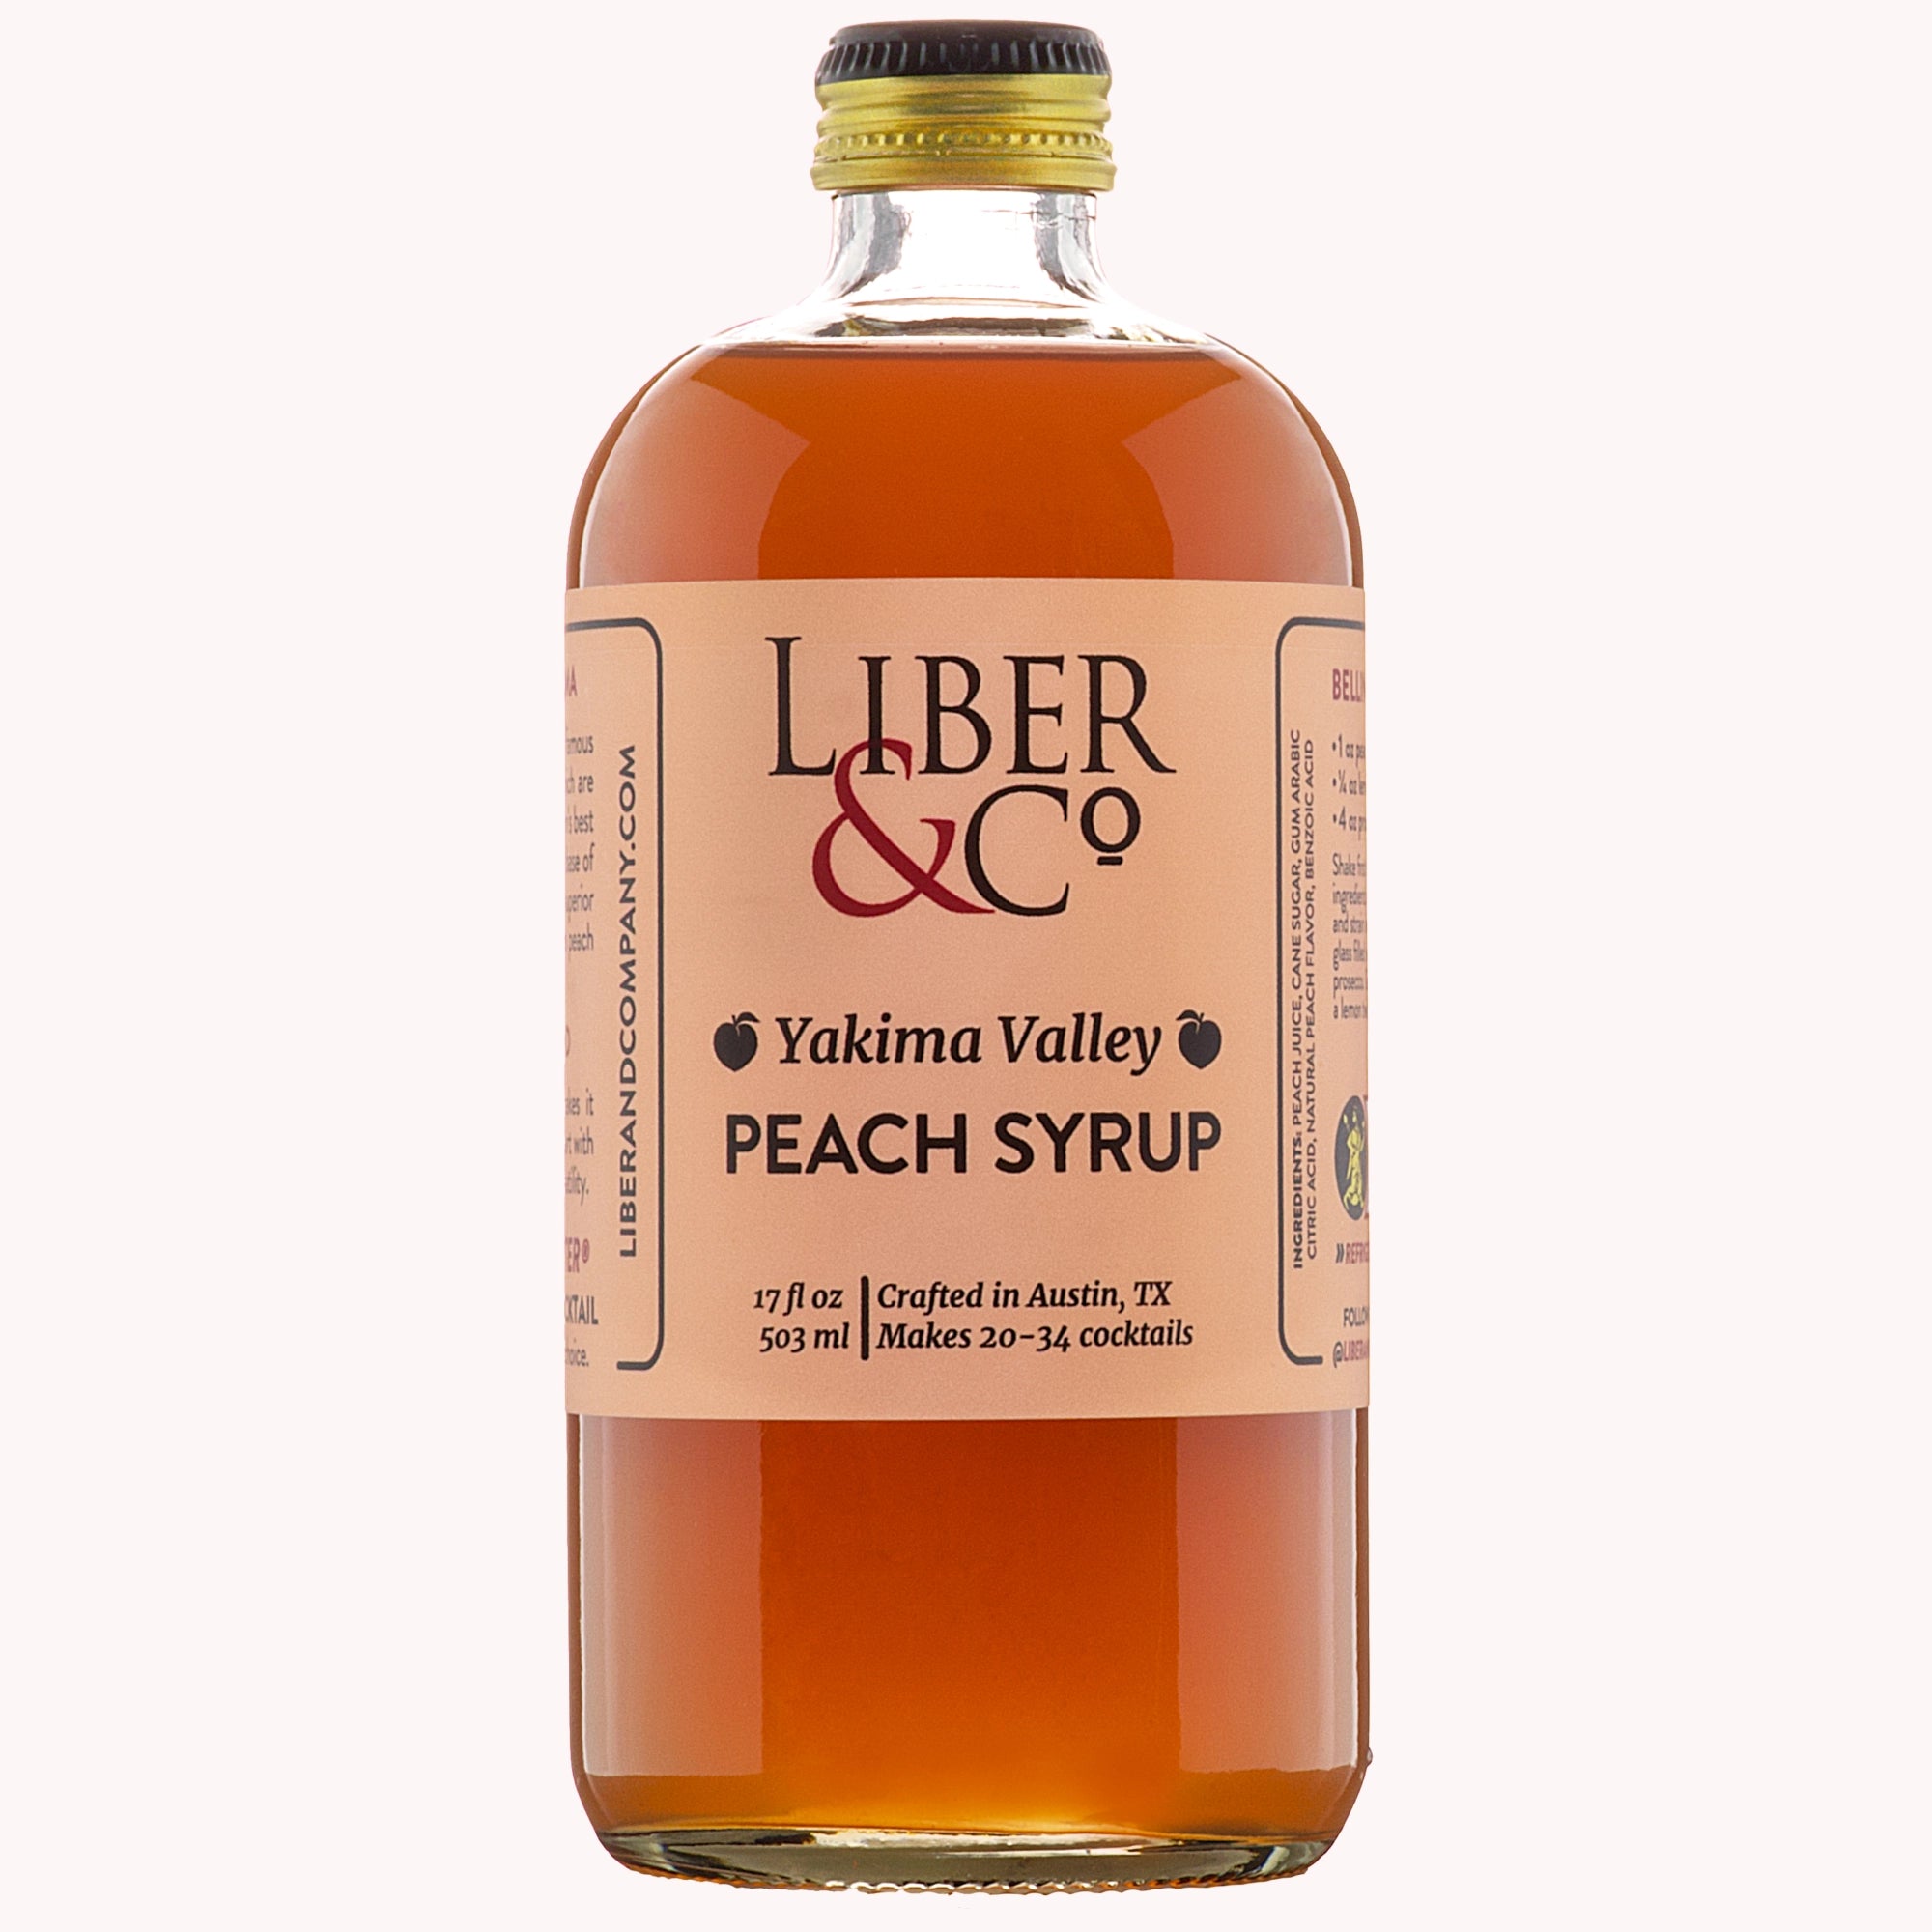 New Release: Yakima Valley Peach Syrup